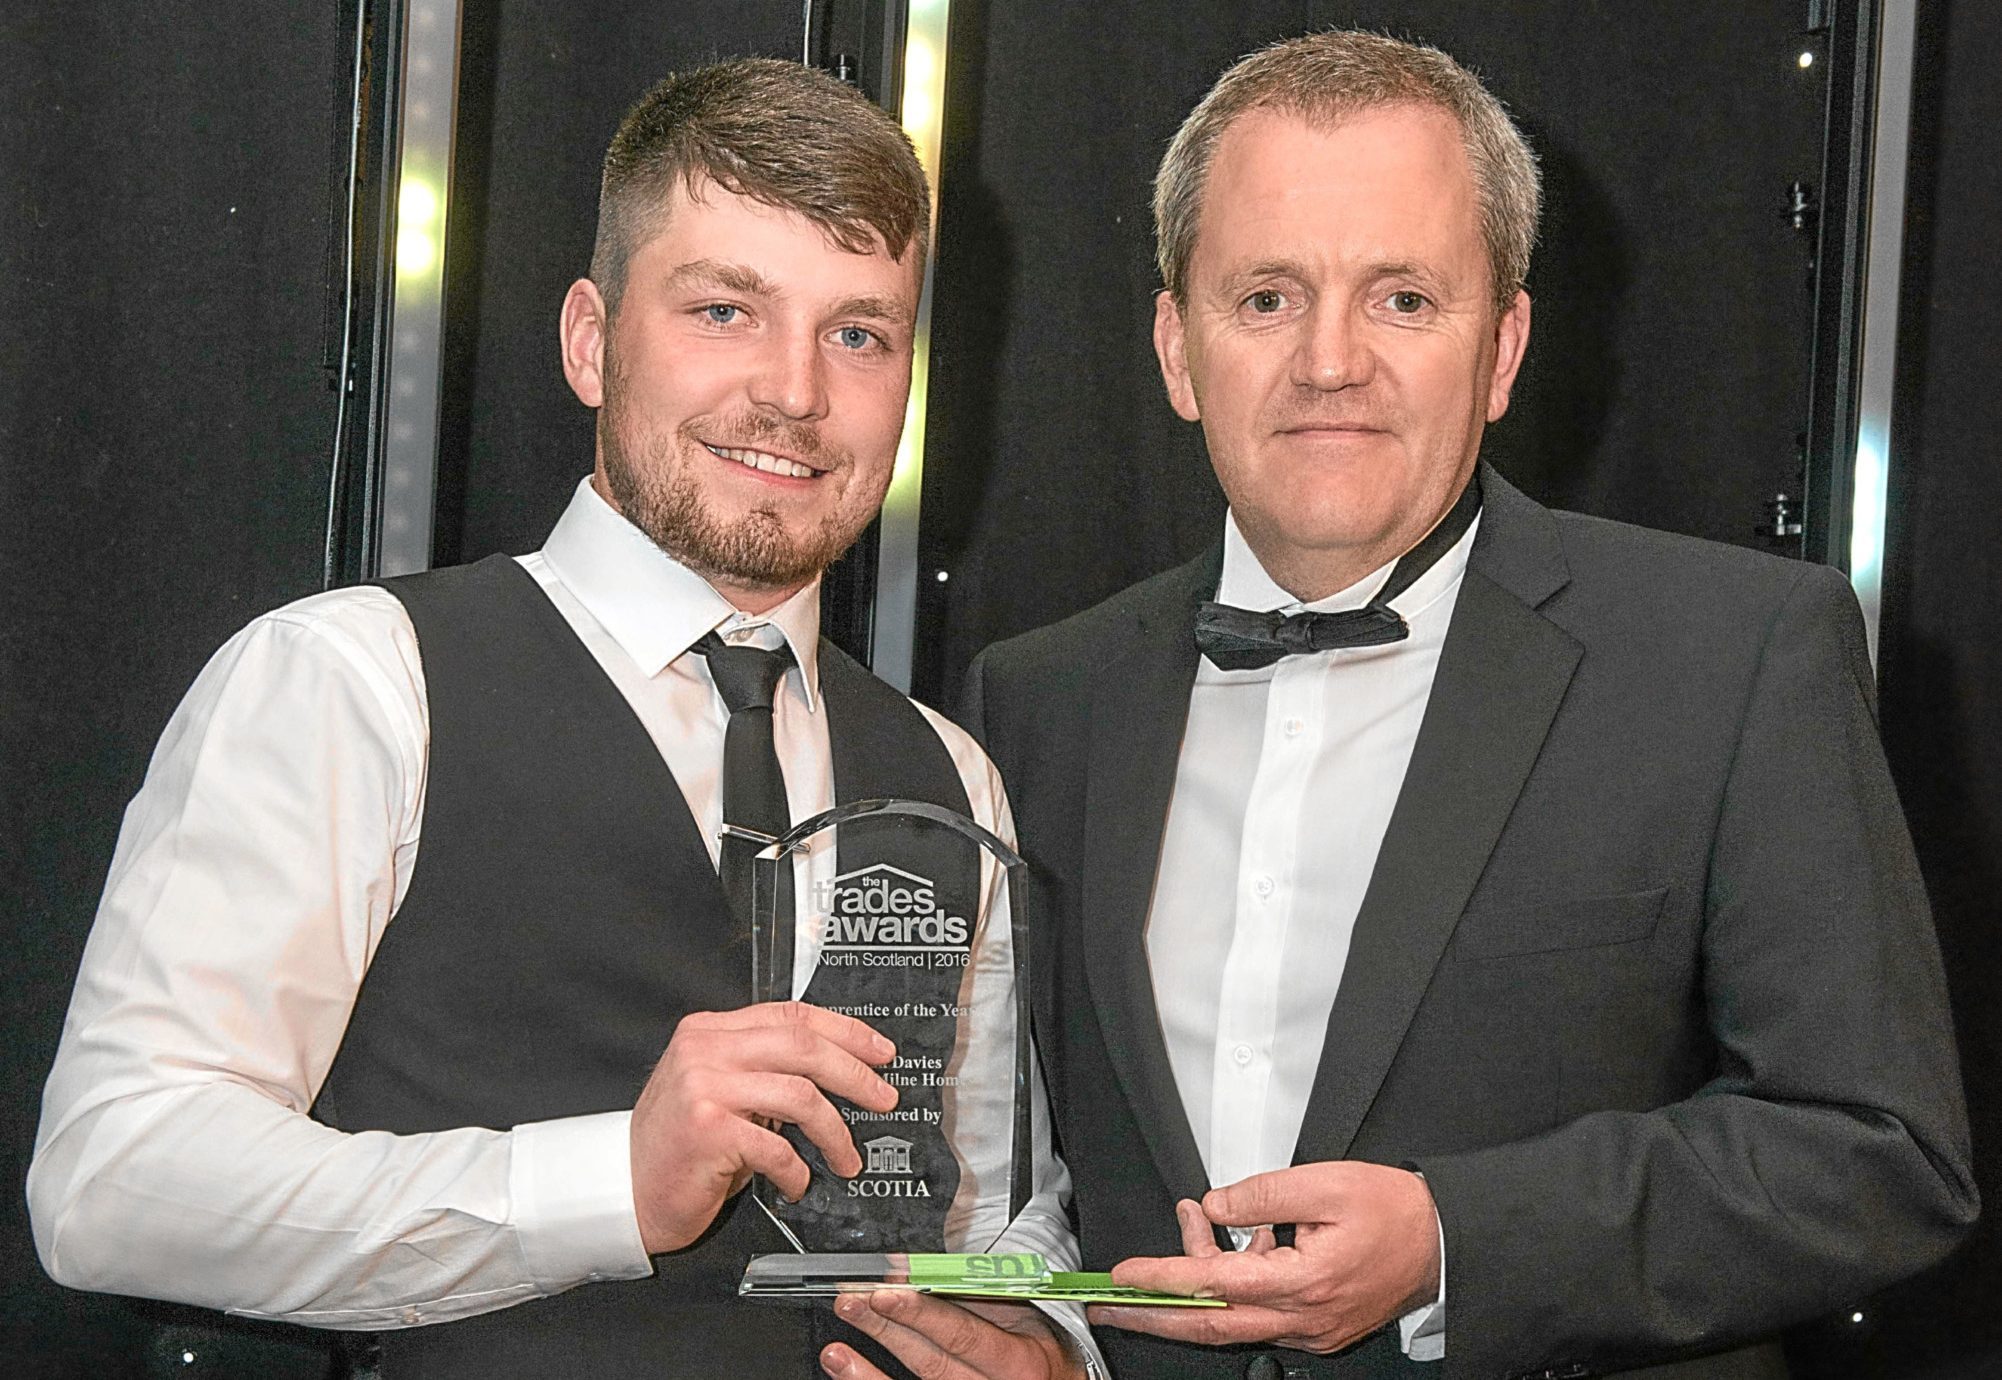 Shaun Davies was crowned Apprentice of the Year.